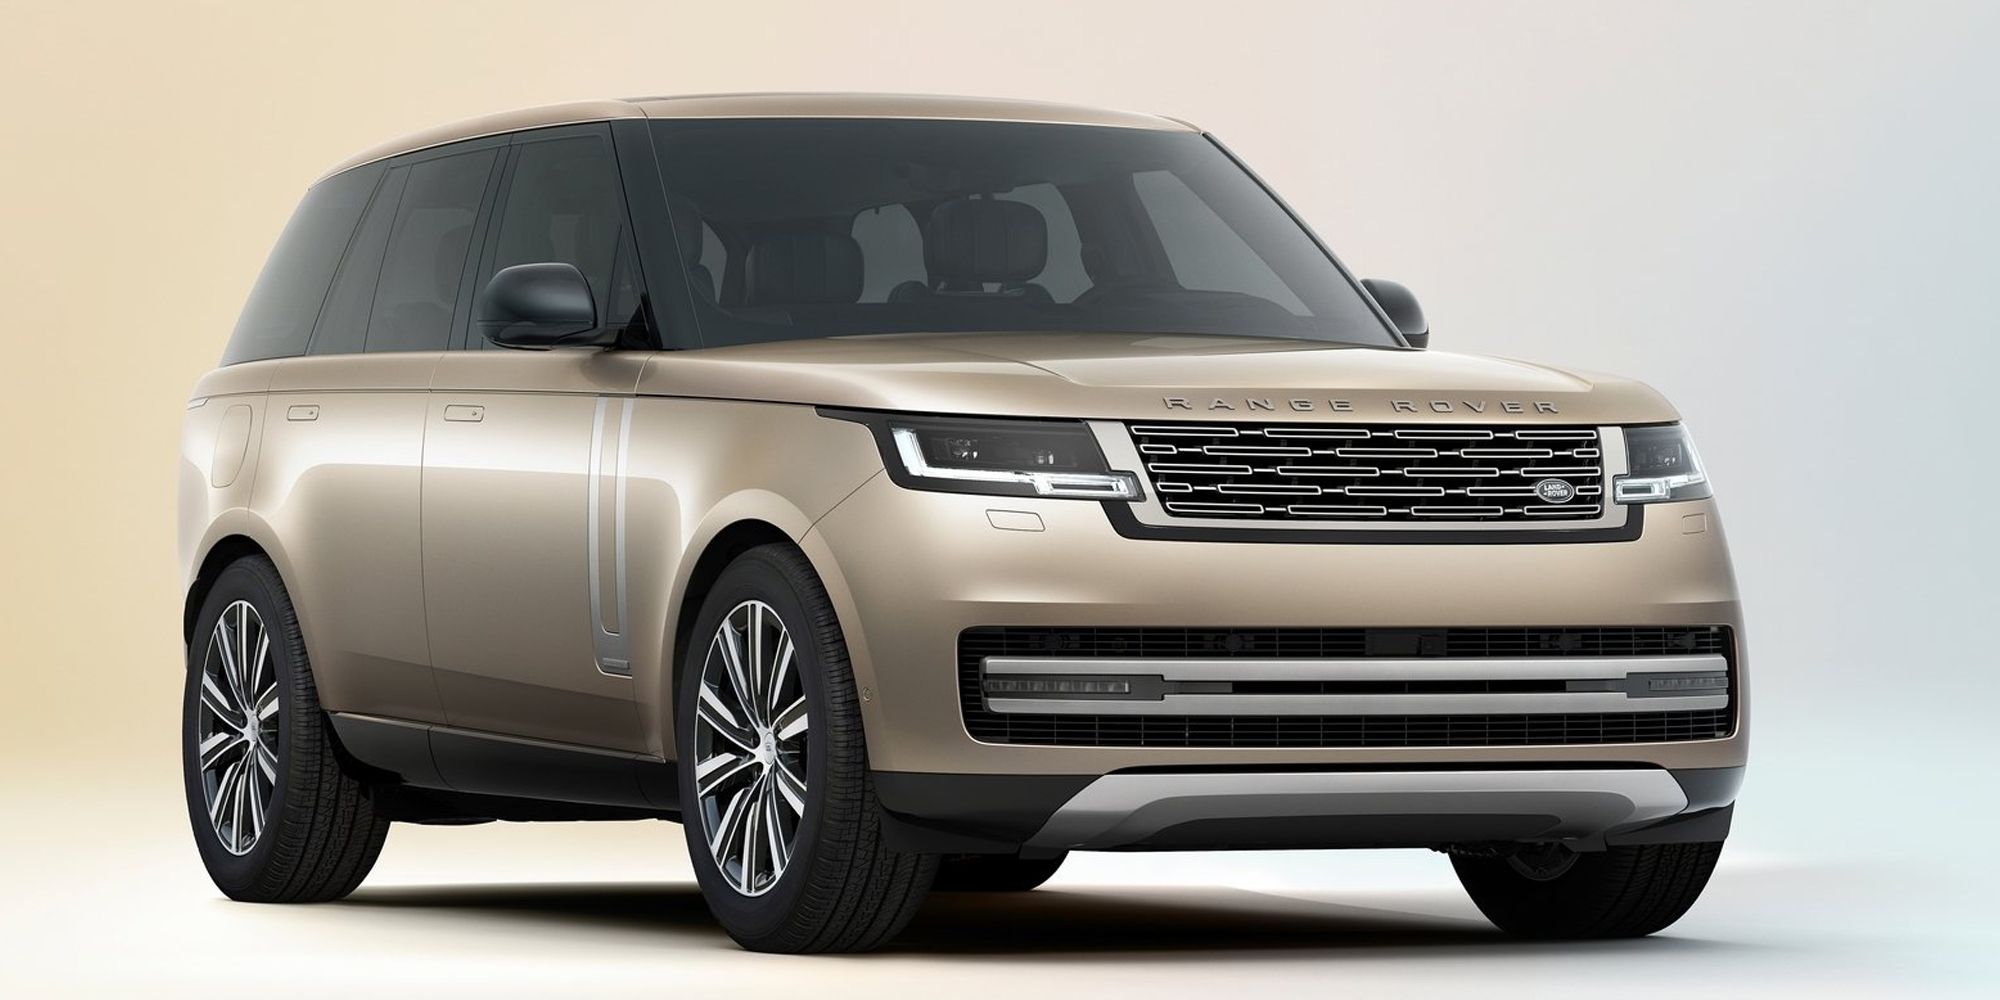 Front 3/4 view of a gold Range Rover, studio render